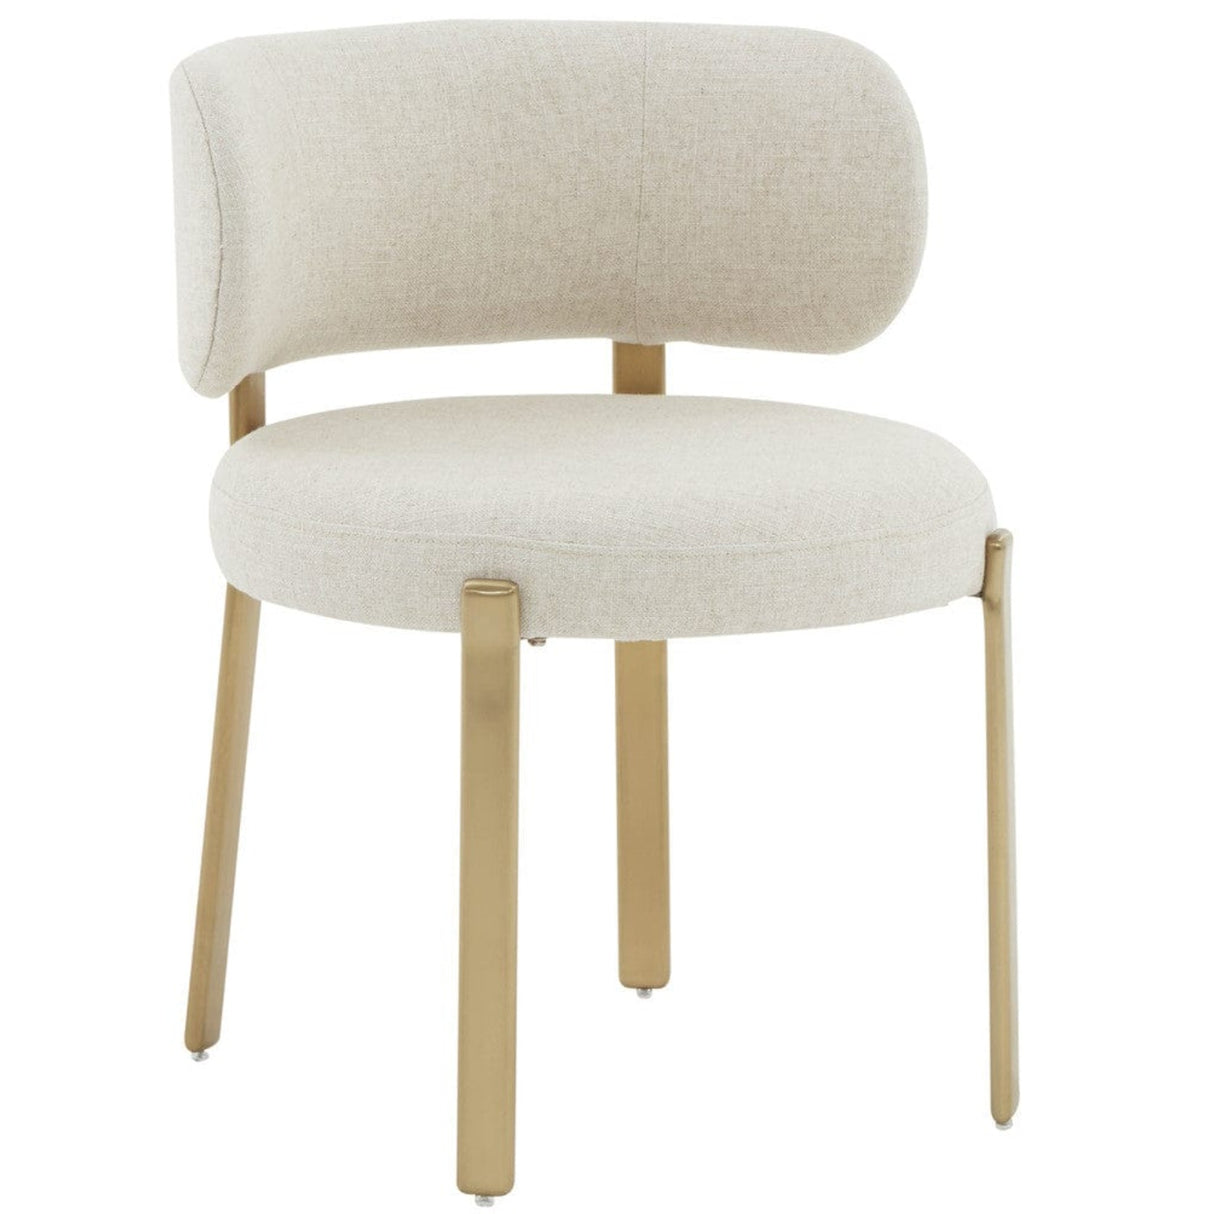 Candelabra Home Margaret Cream Linen Dining Chair Curved Upholstered Dining Chair TOV-D68650